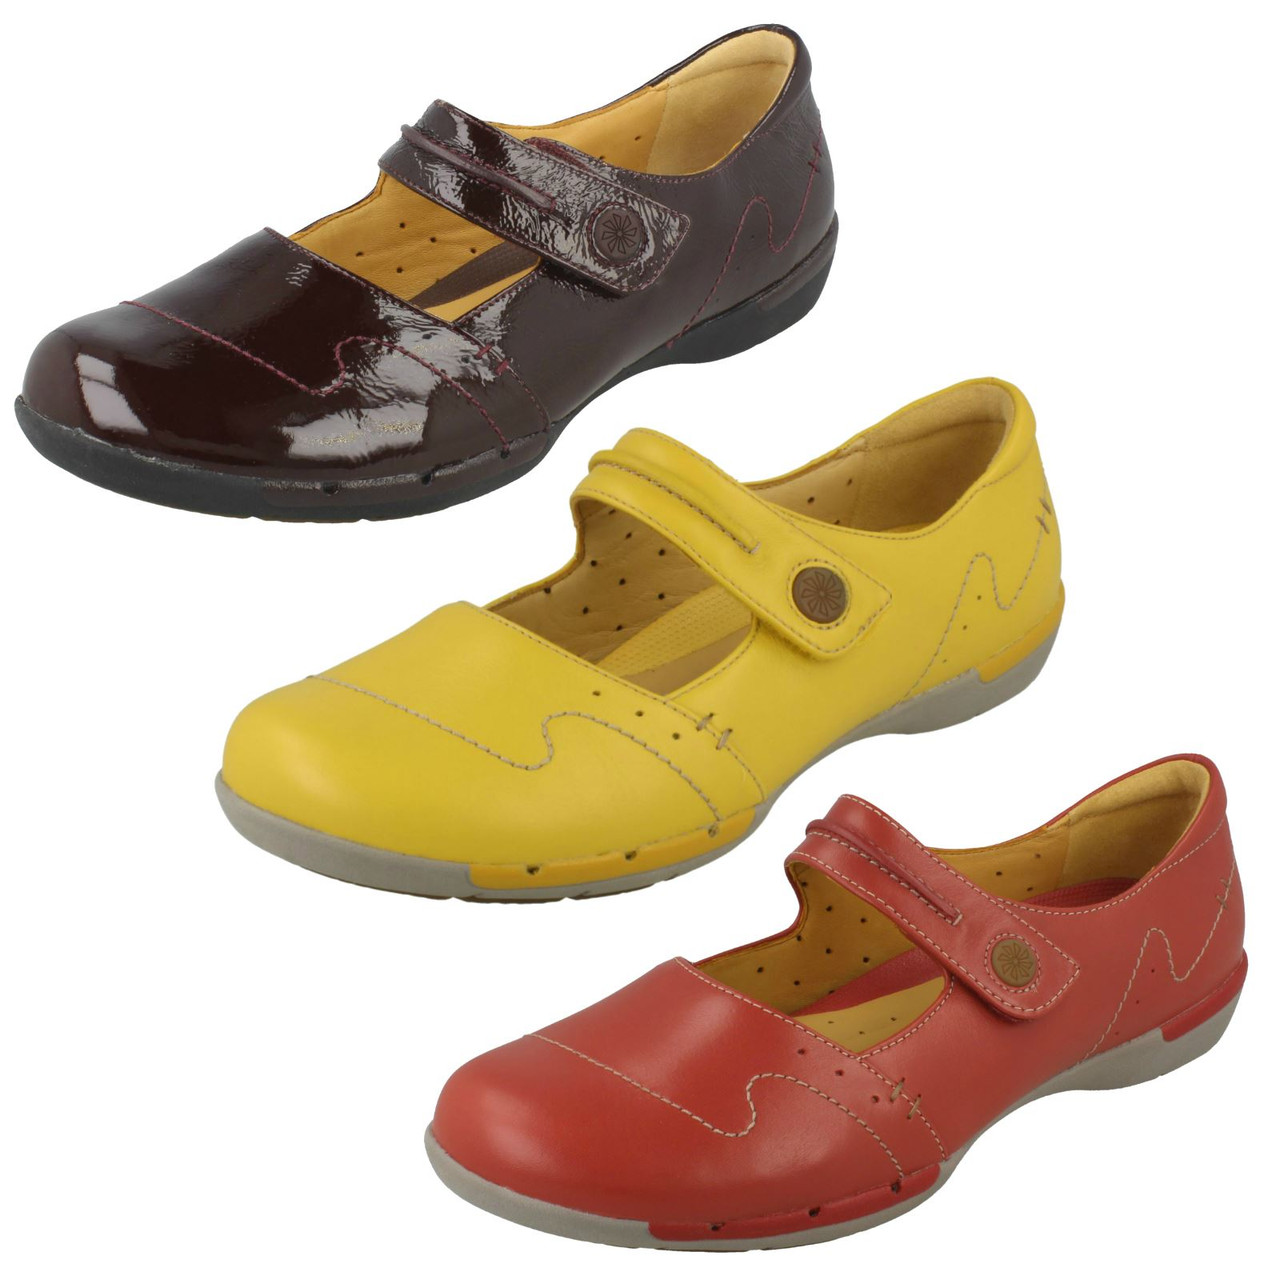 Ladies Clarks Unstructured Flat Shoes 